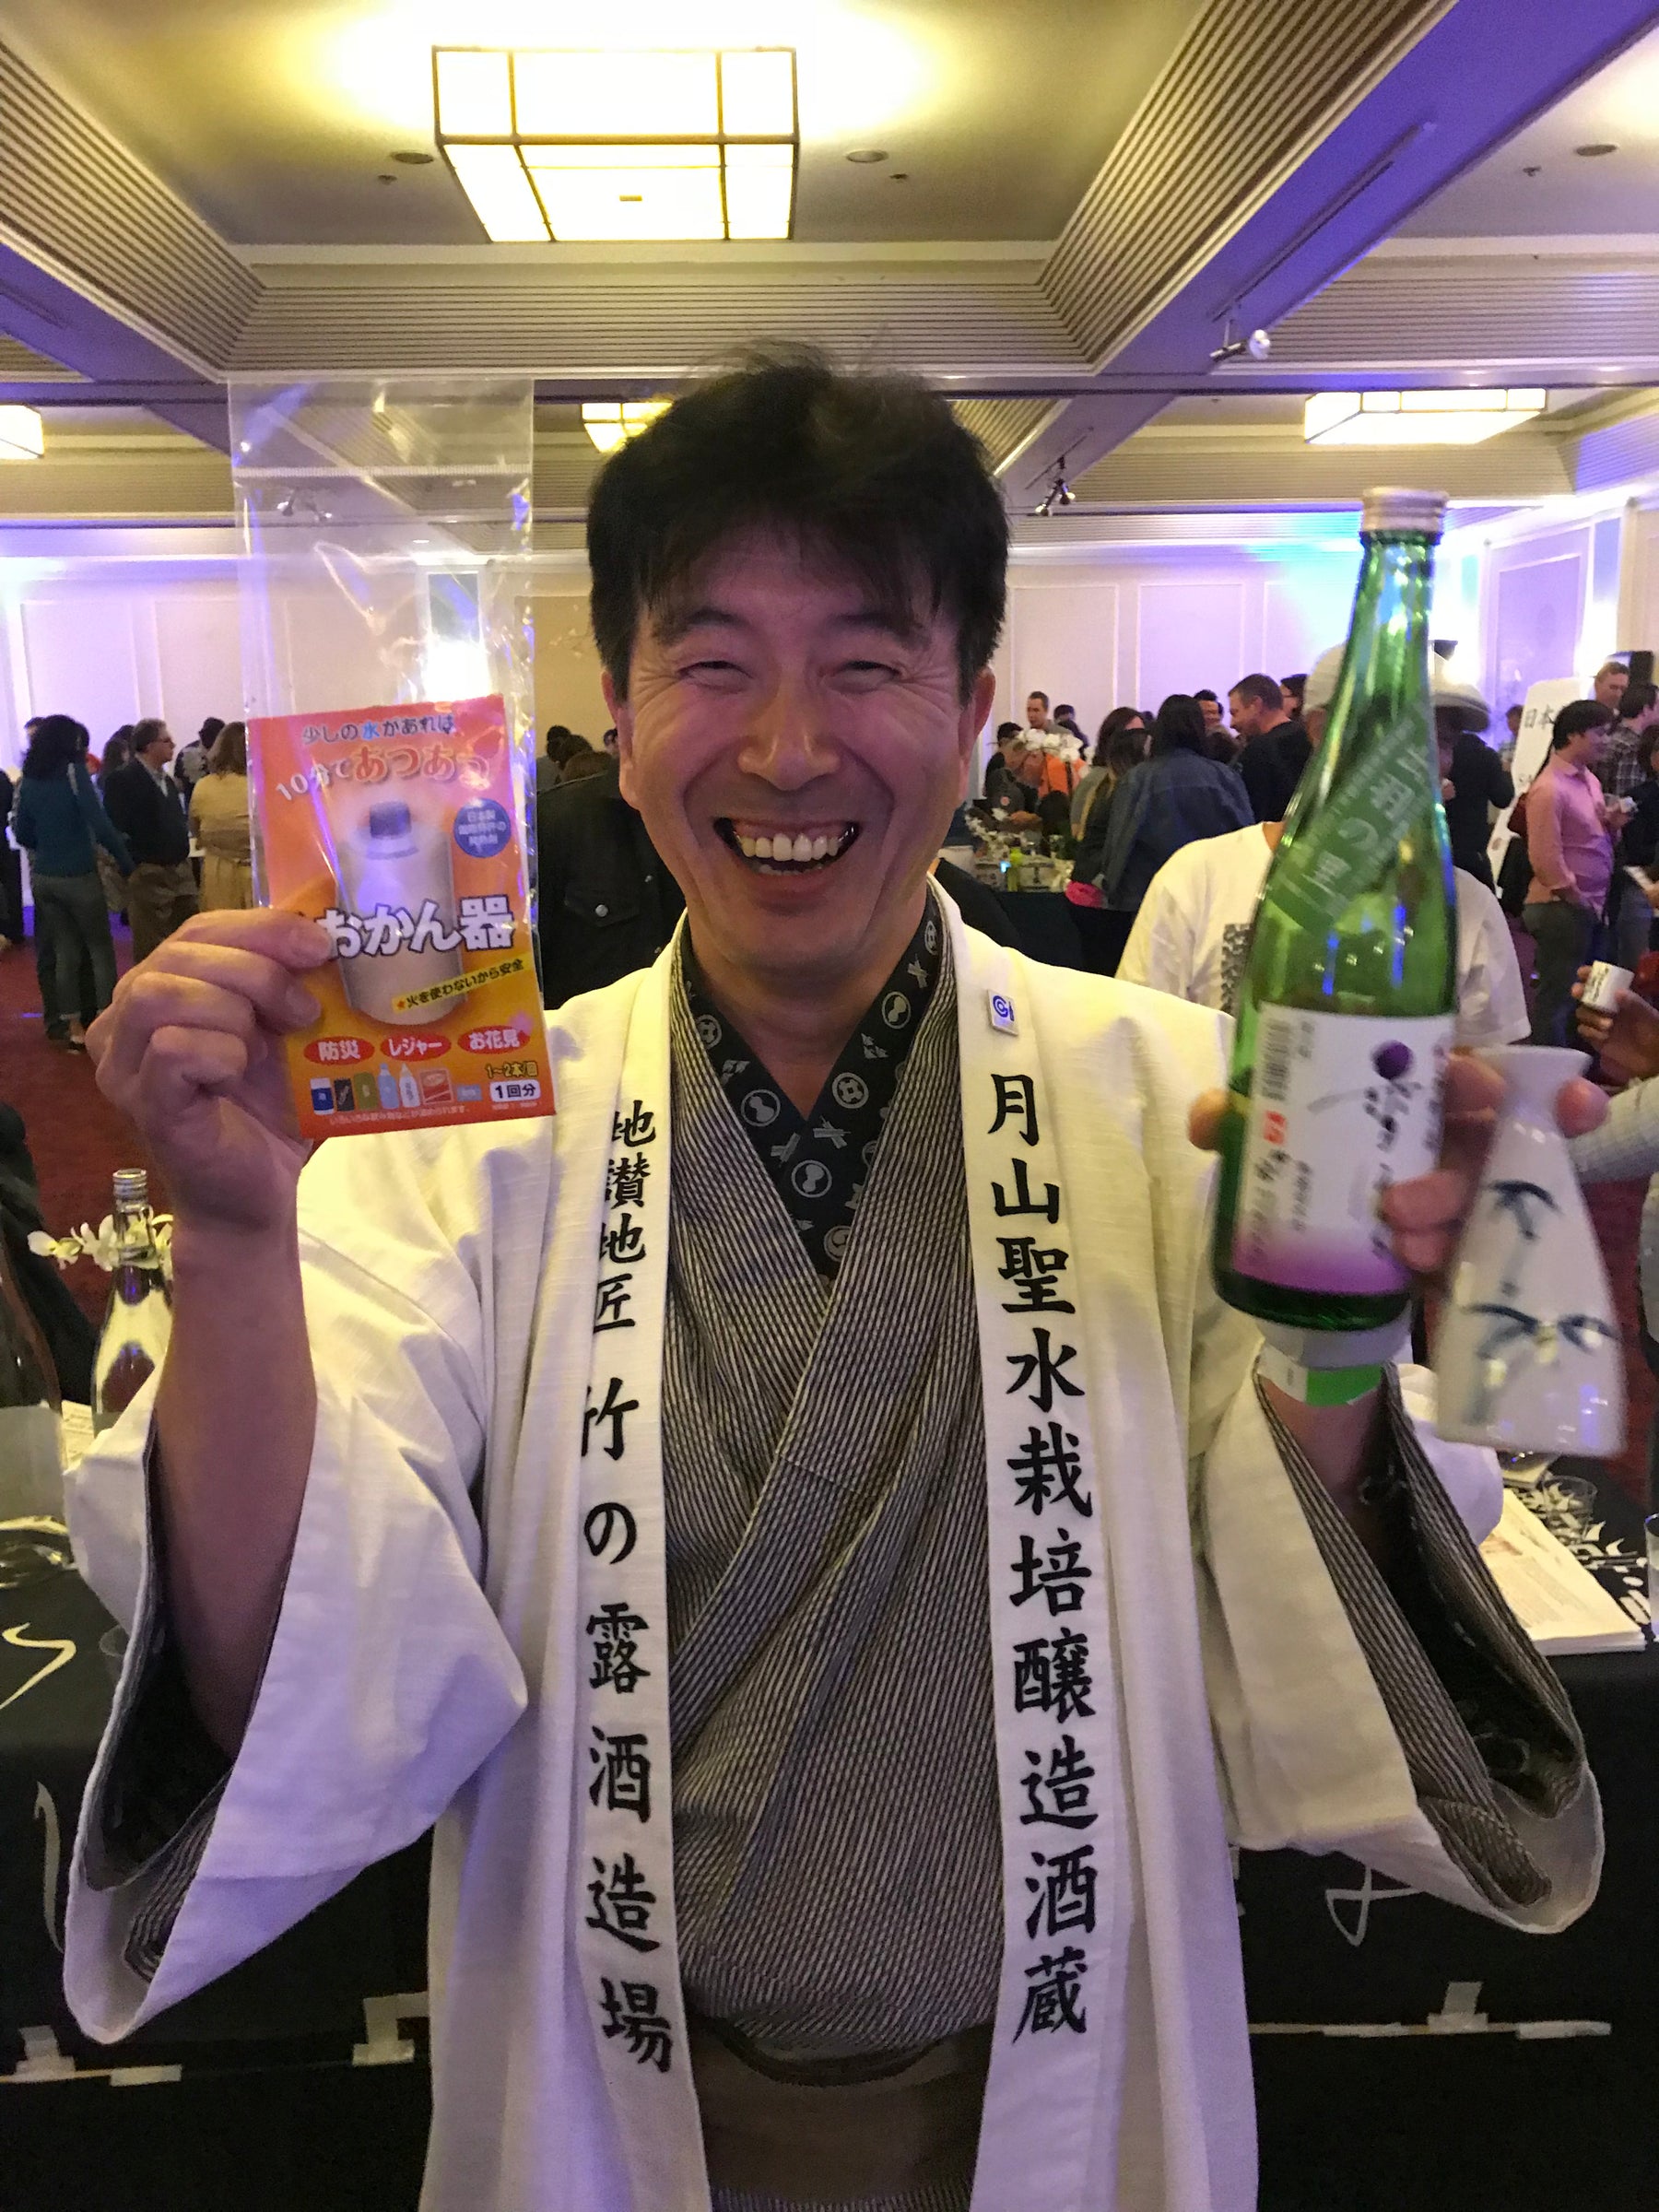 SAKE DAY – Help A Special Brewery For SAKE DAY